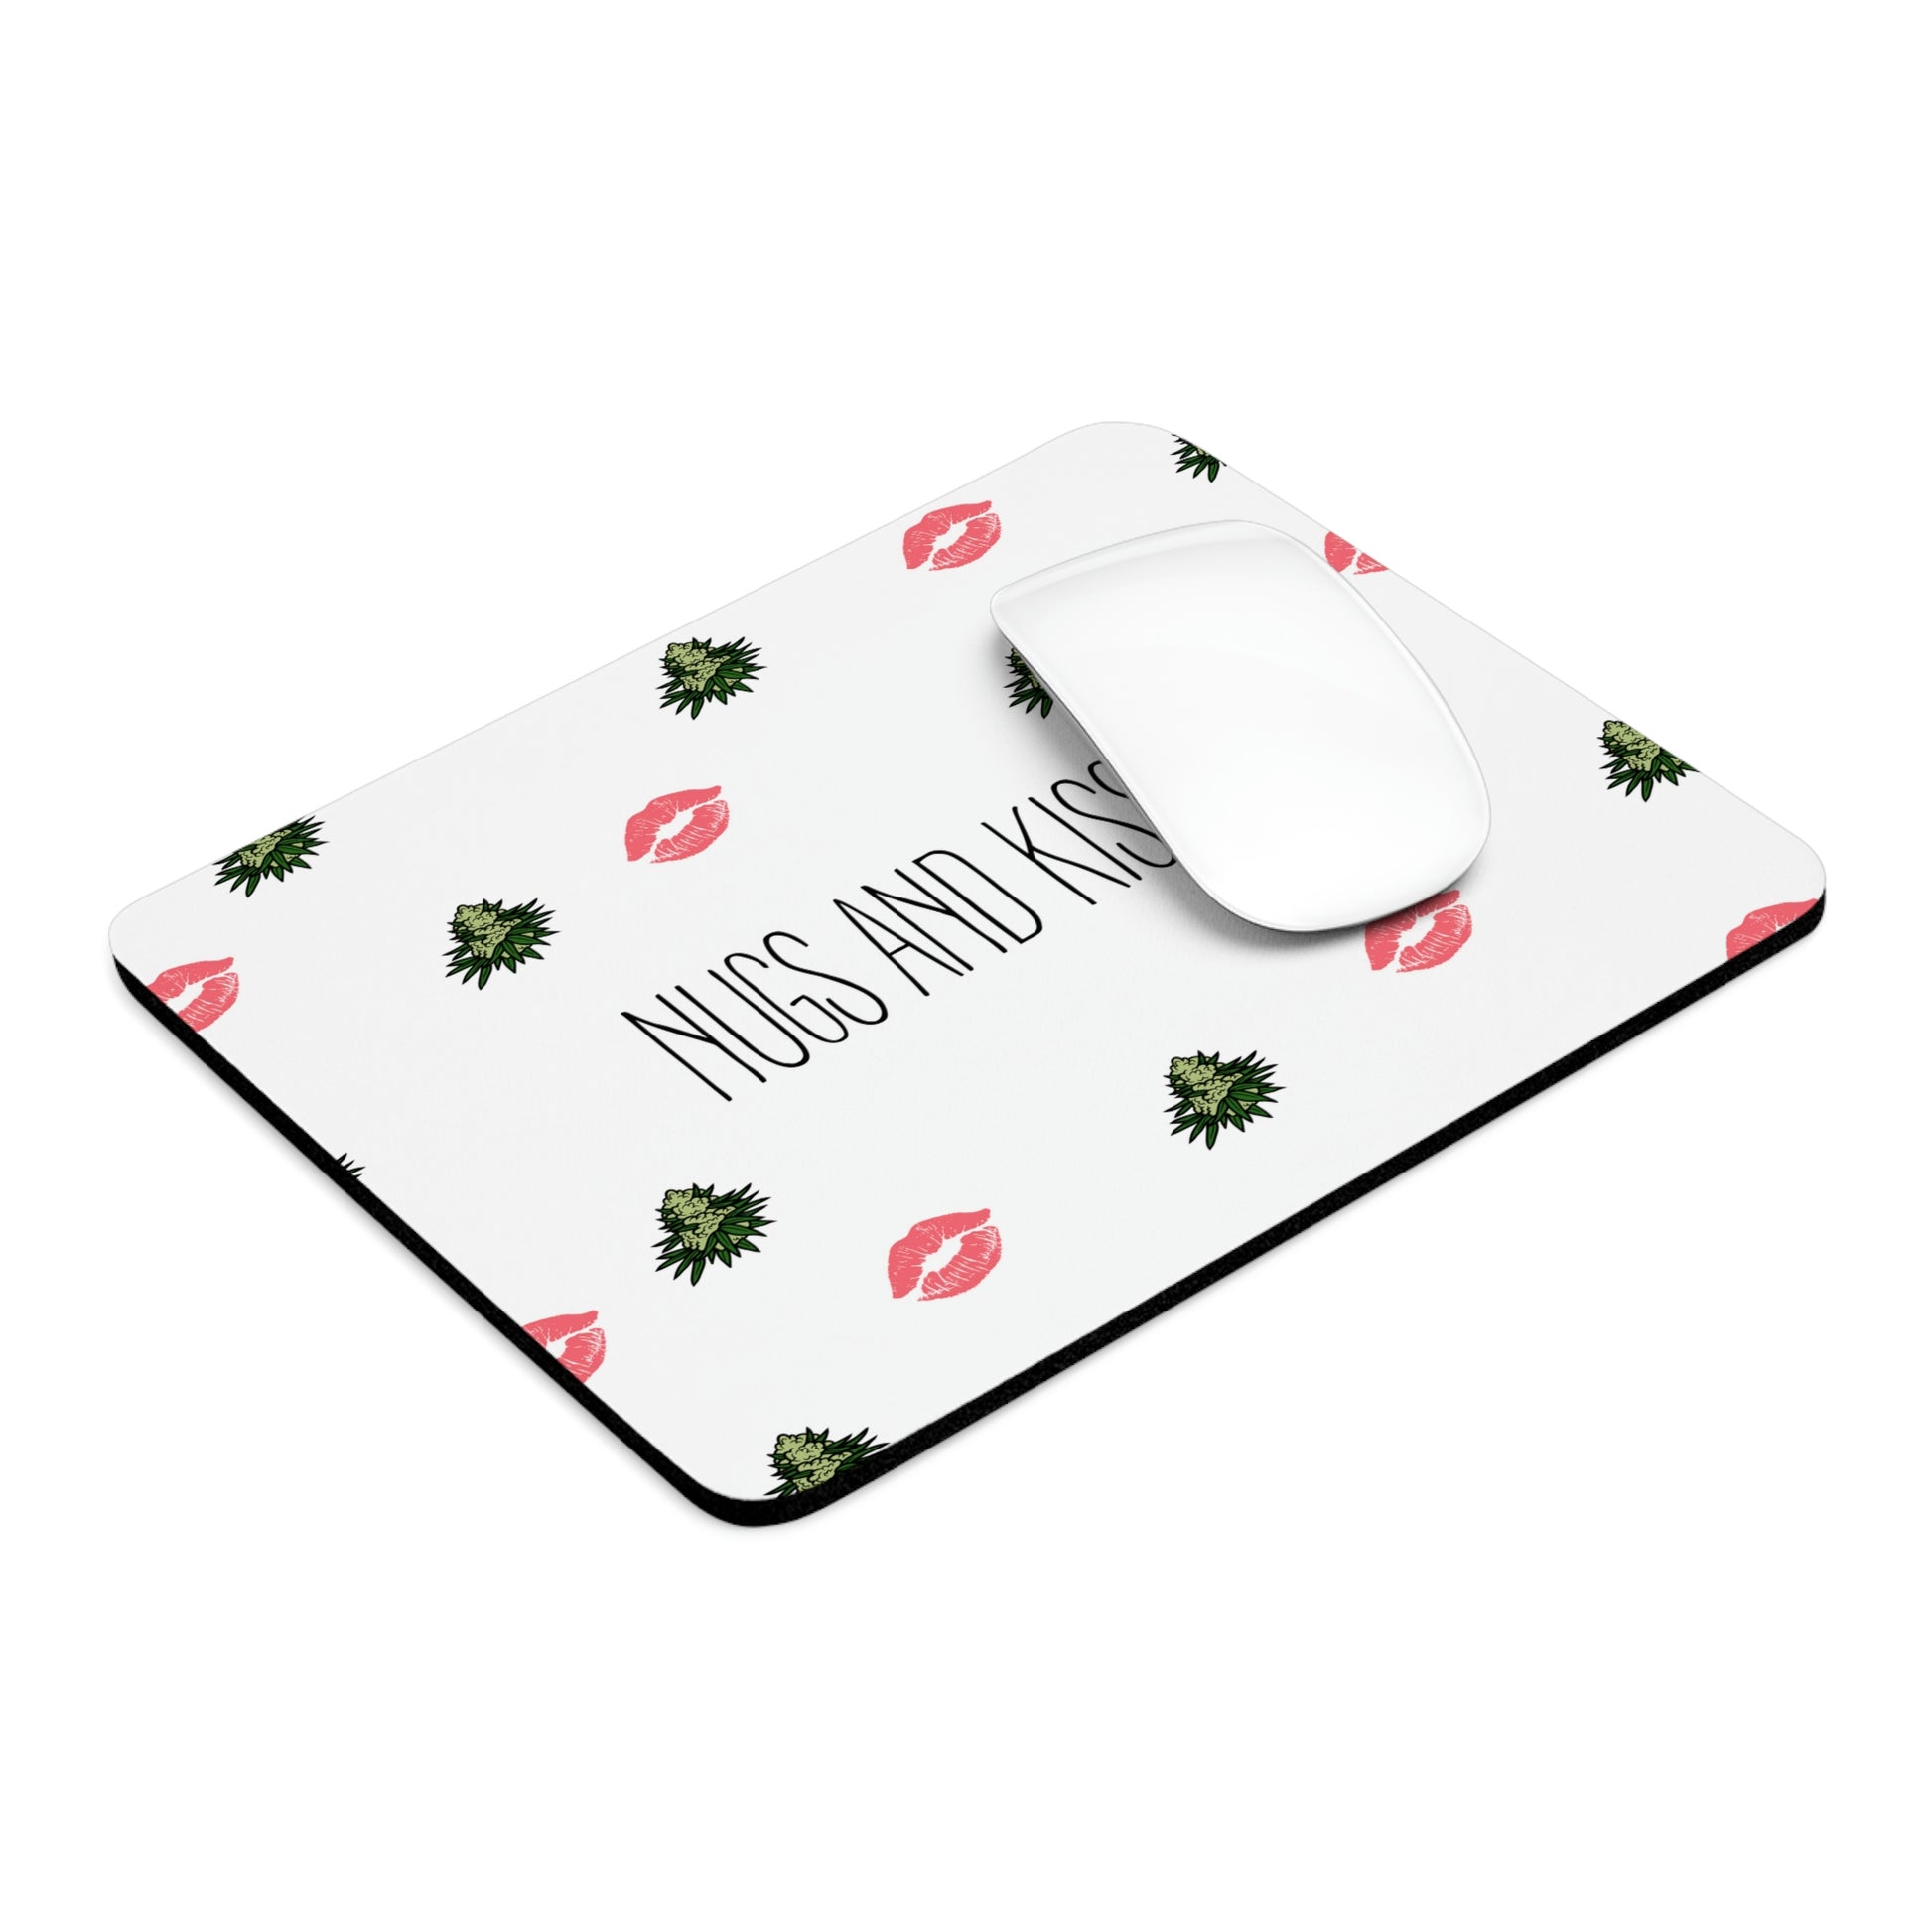 The Nugs and Kisses Cannabis Mouse Pad being shown at a spectacular angle for display with a matching white wireless mouse. 